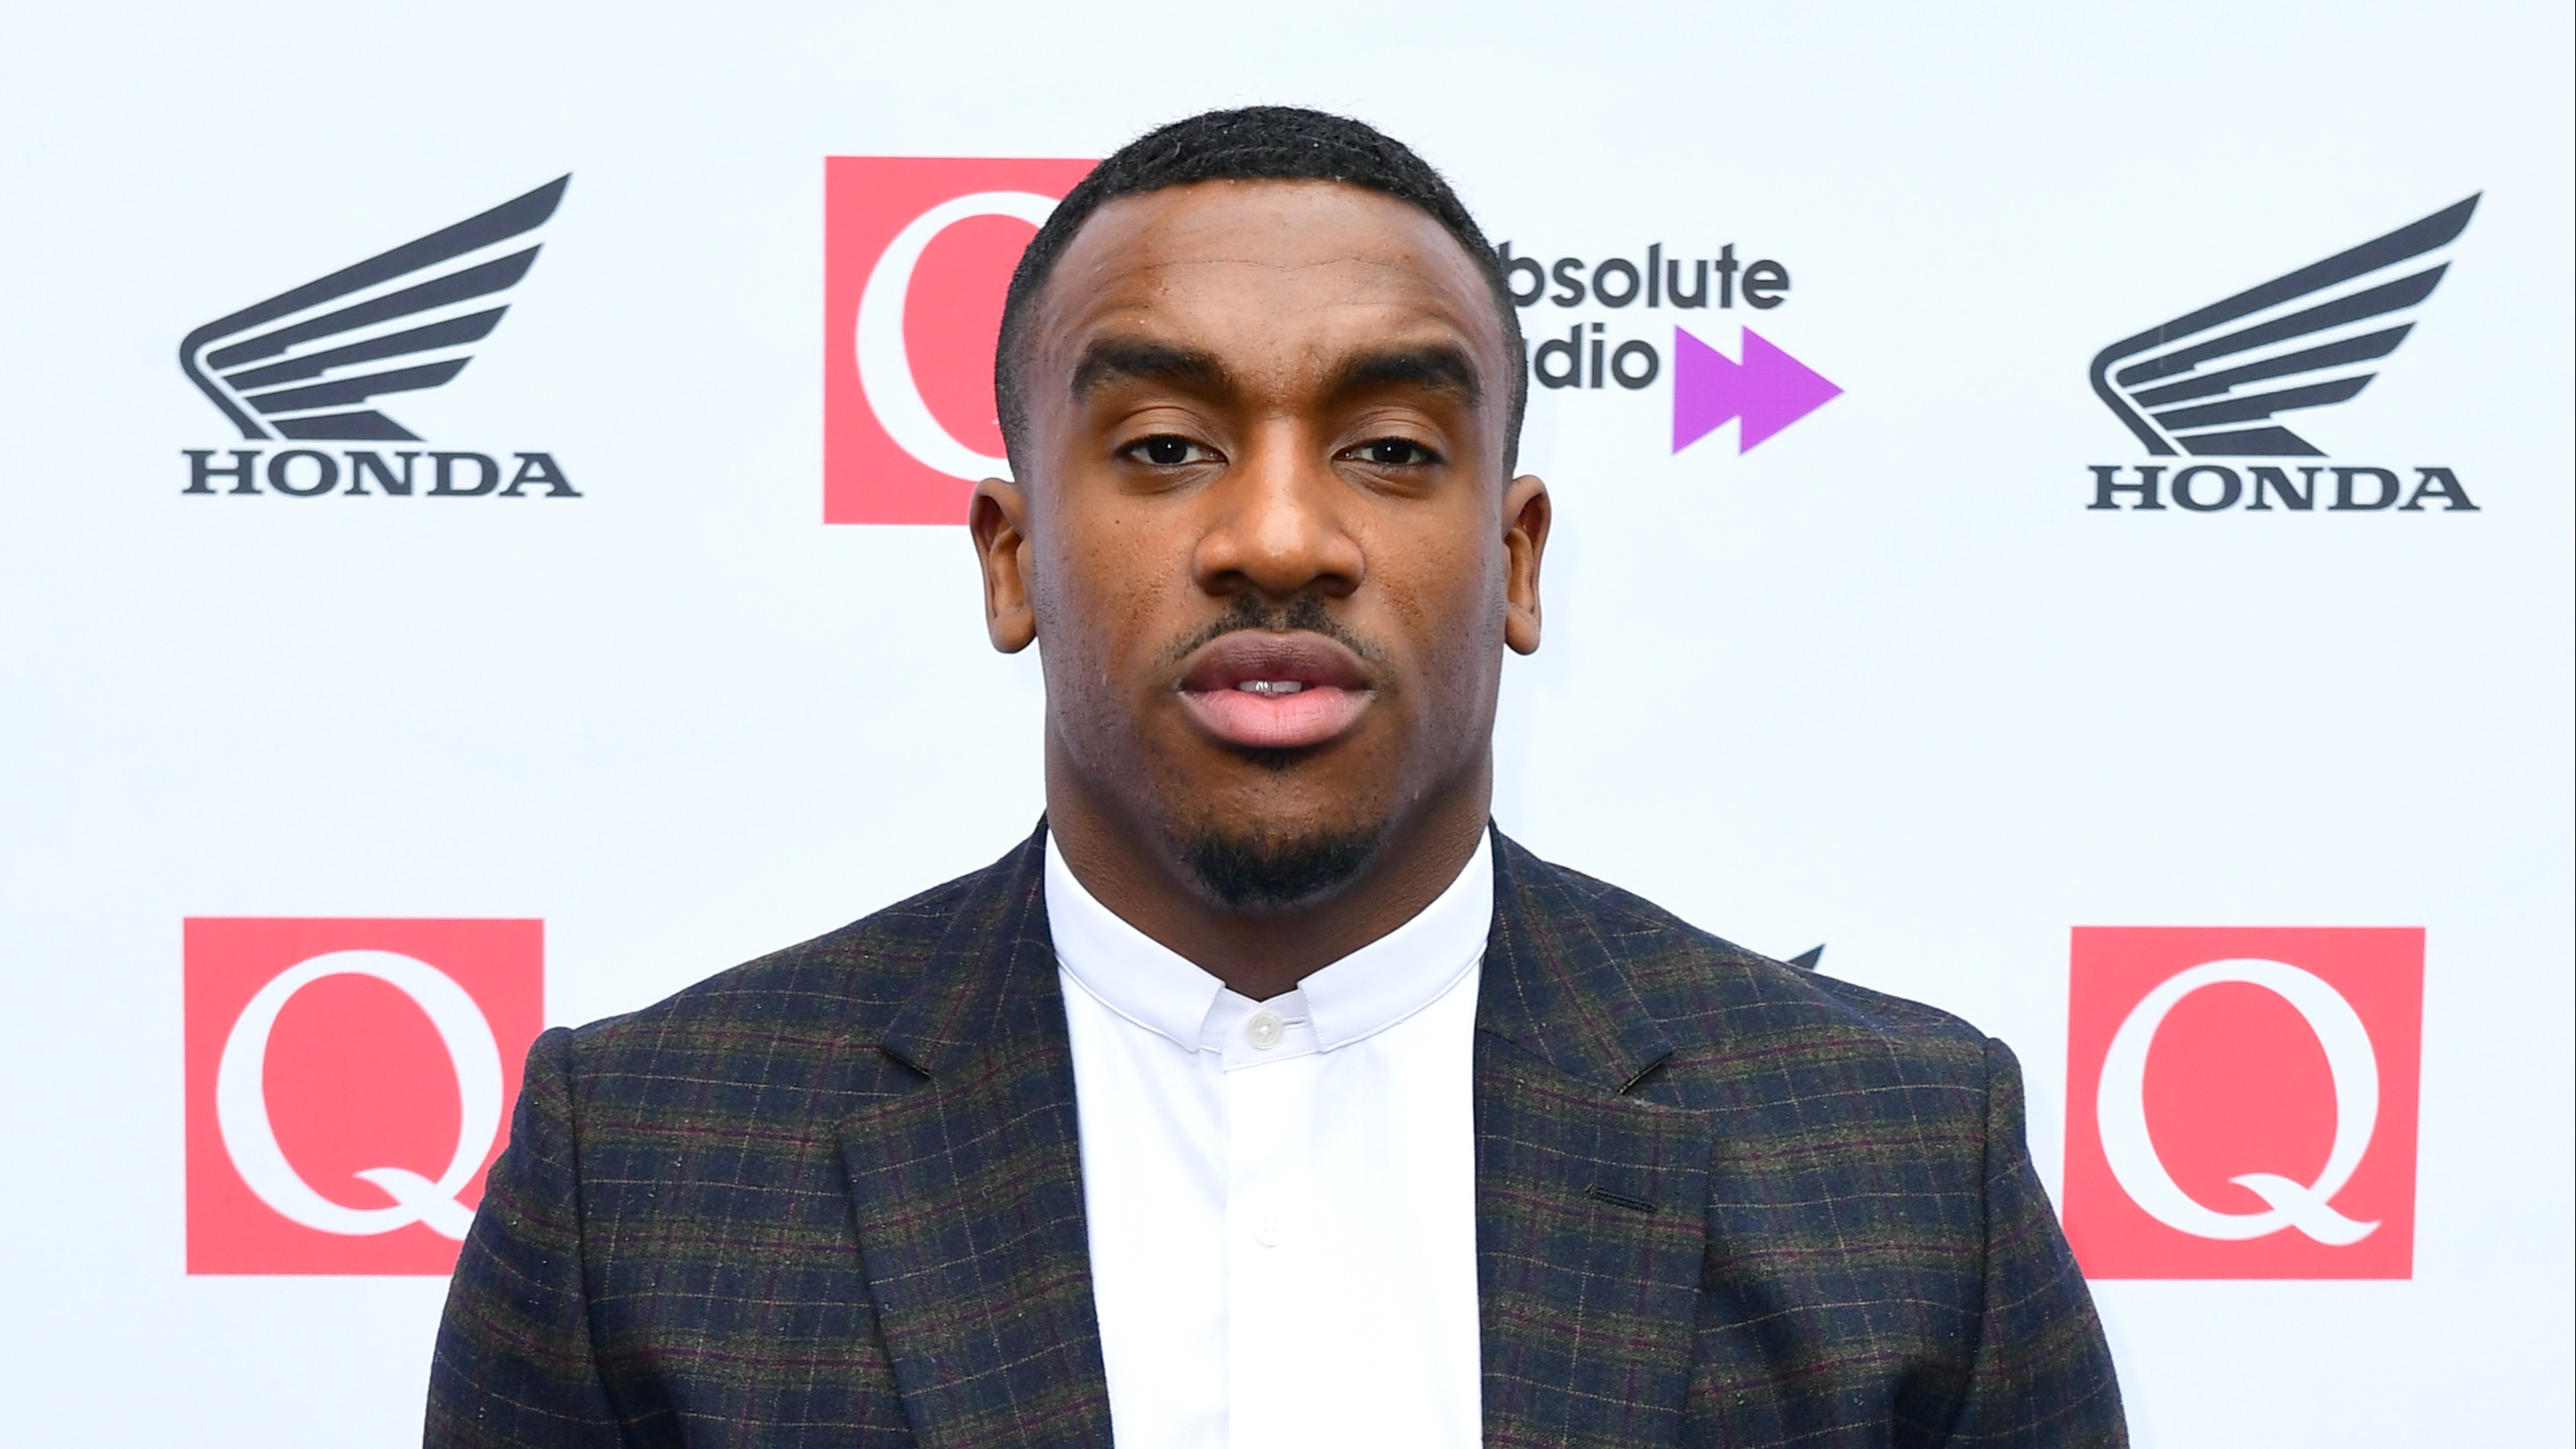 Manchester-born rapper Bugzy Malone cleared after fracturing two men's jaws